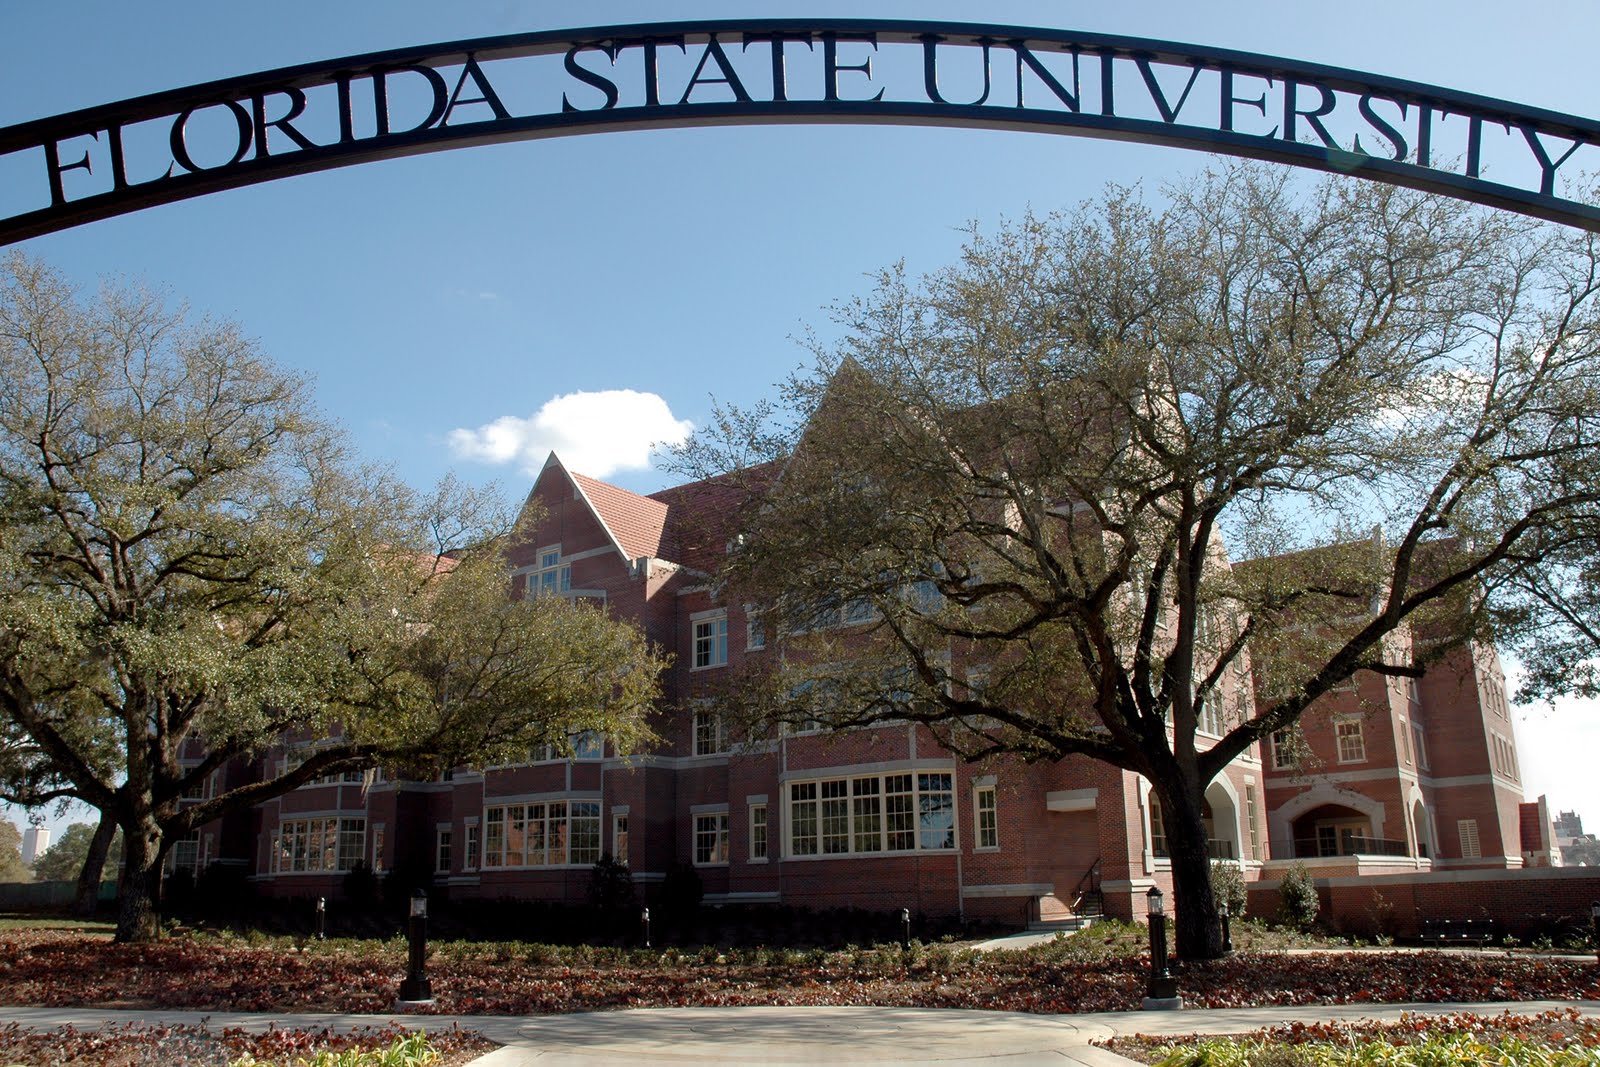 Florida State University Browser Themes & Wallpapers